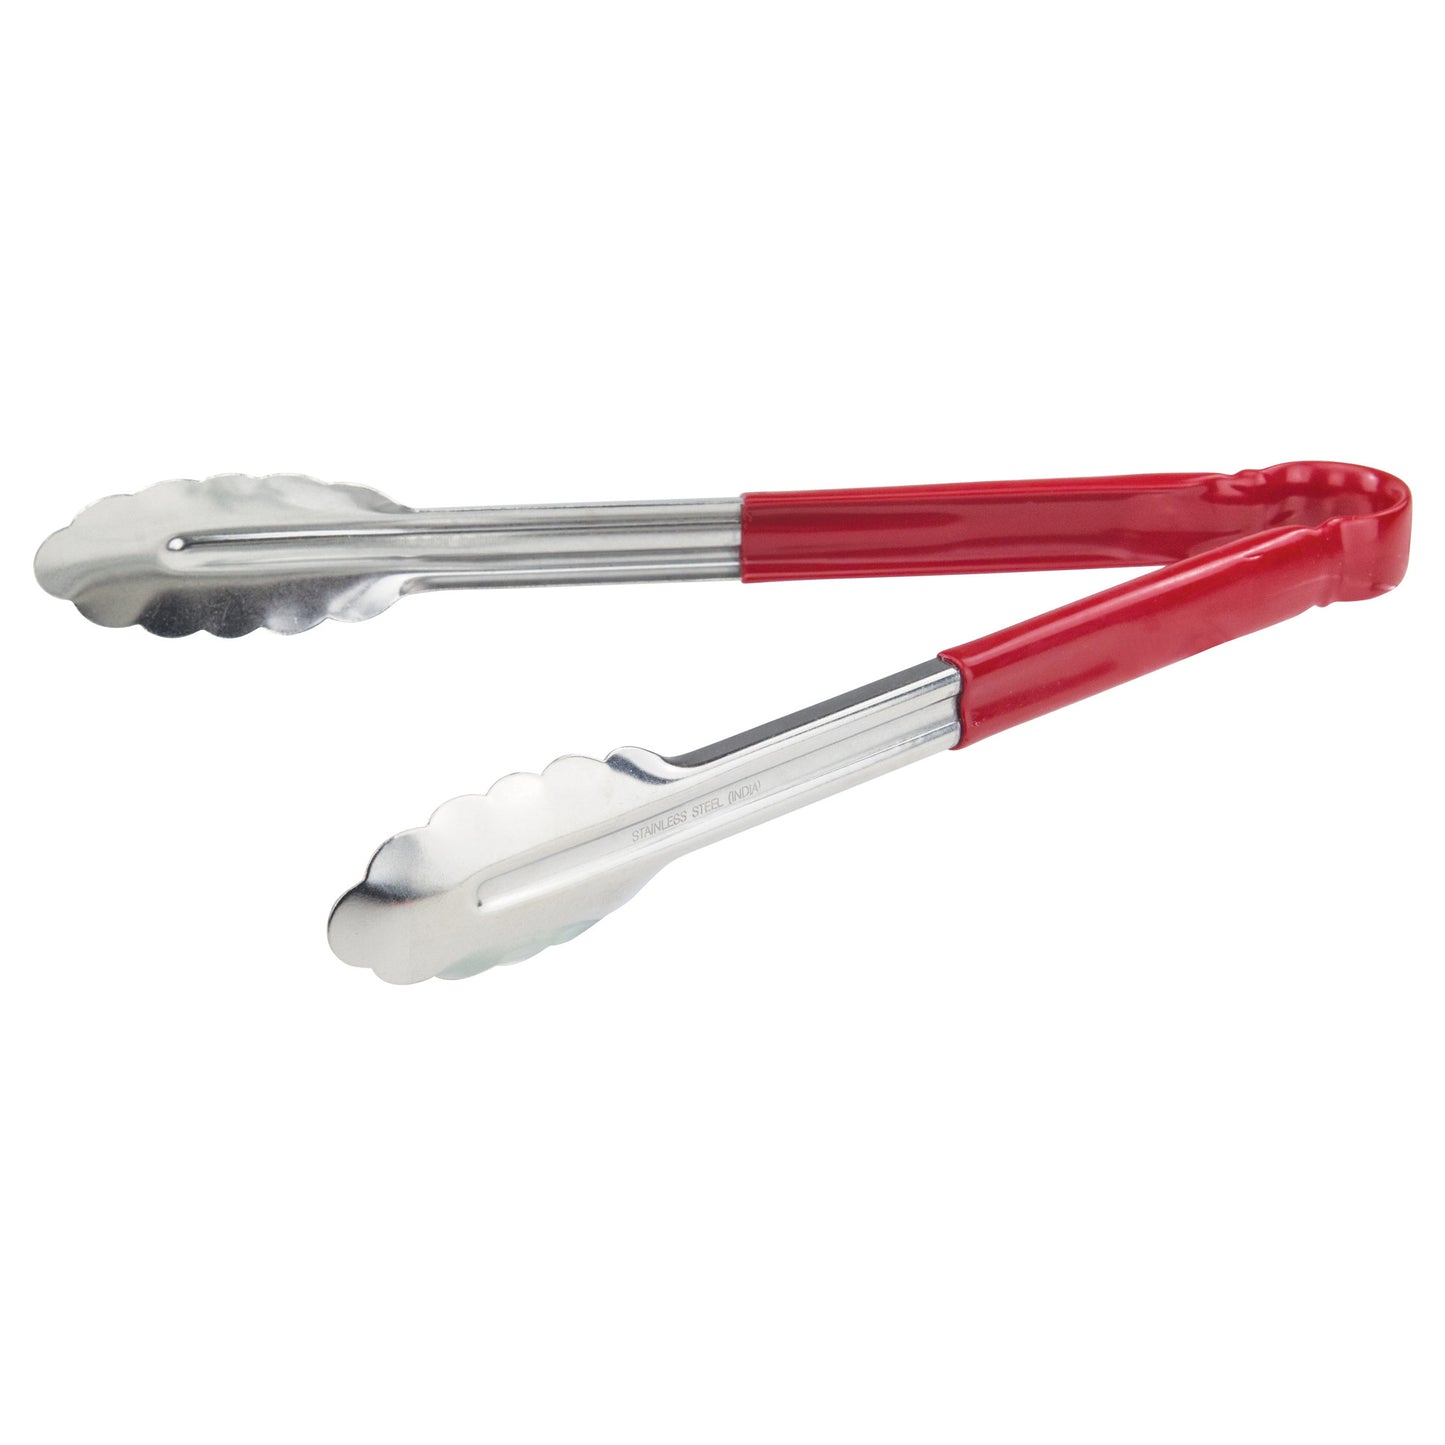 UT-12HP-R - Heavy-Duty Utility Tongs with Plastic Handle - 12", Red